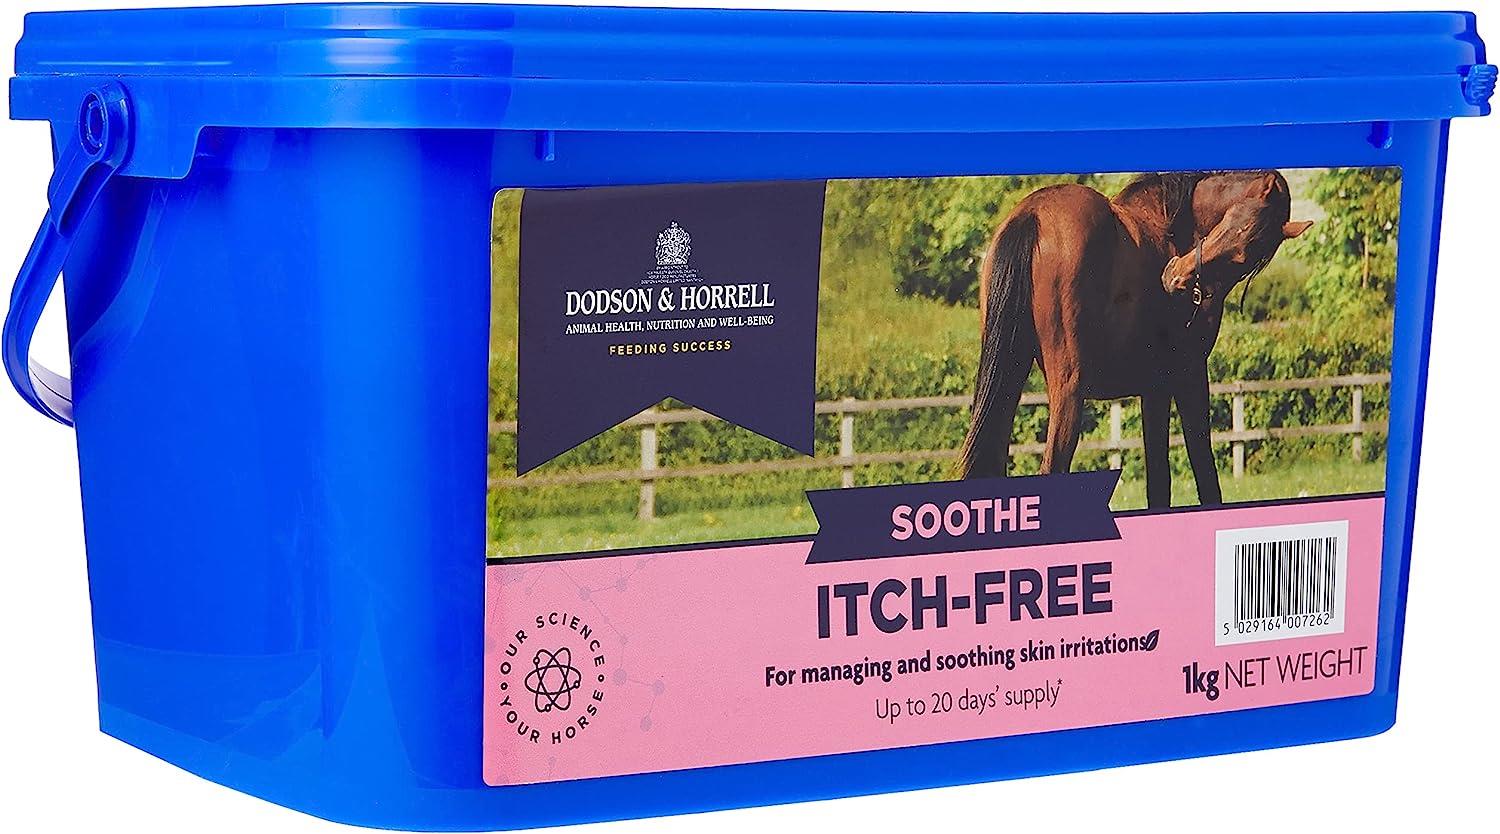 Dodson & Horrell Itch-Free, a herbal supplement for horse skin health